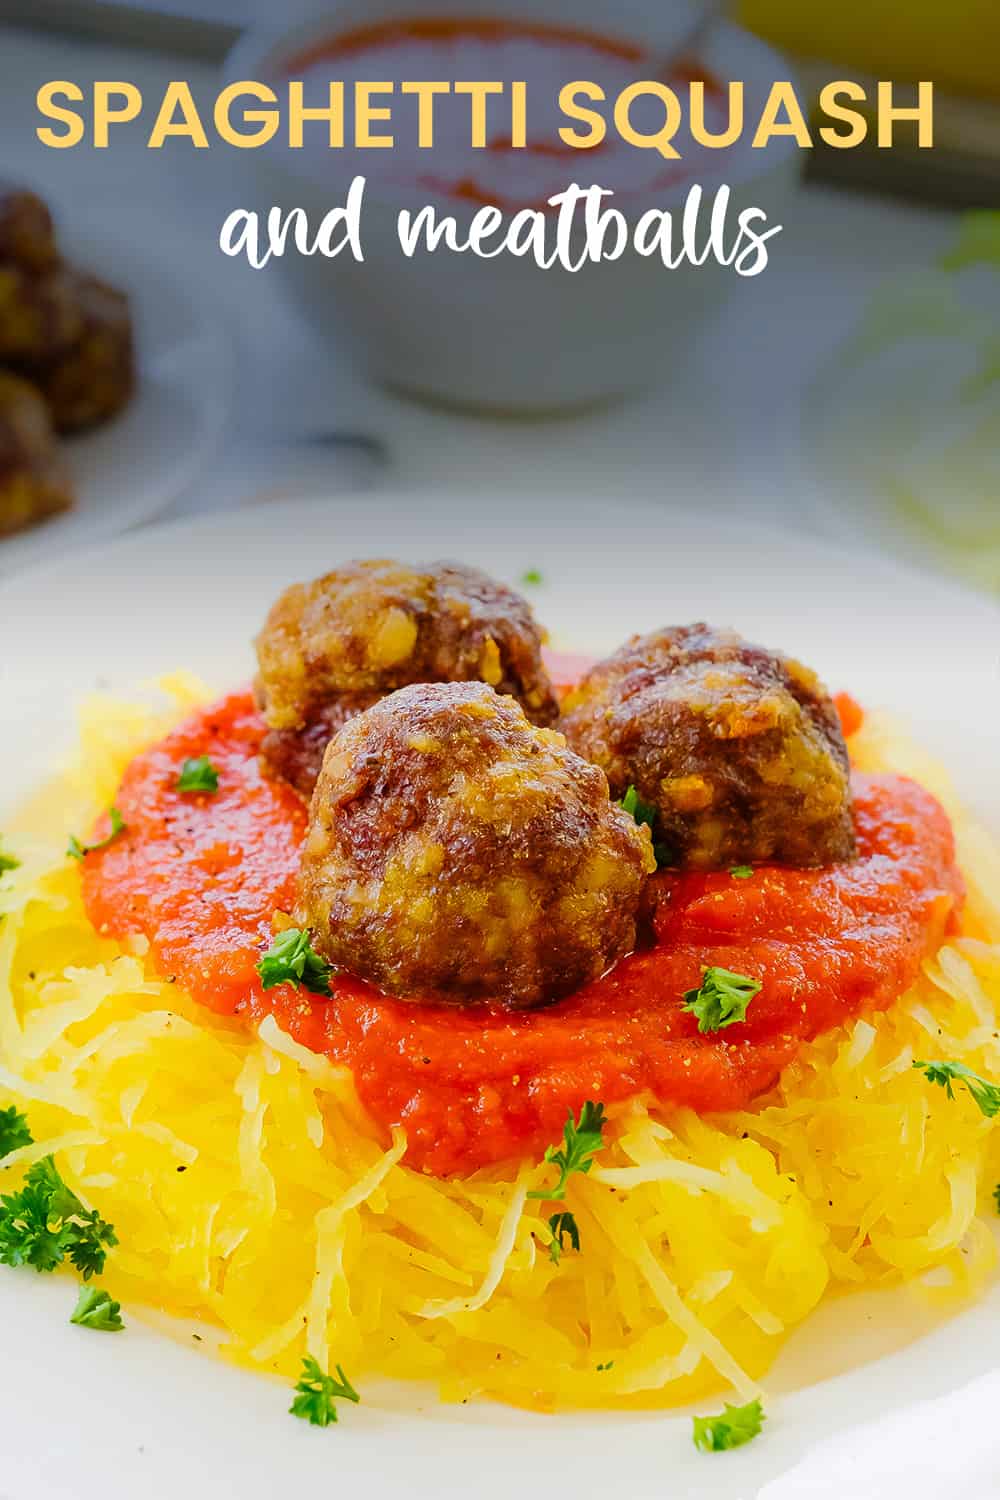 Plate topped with spaghetti squash and meatballs.